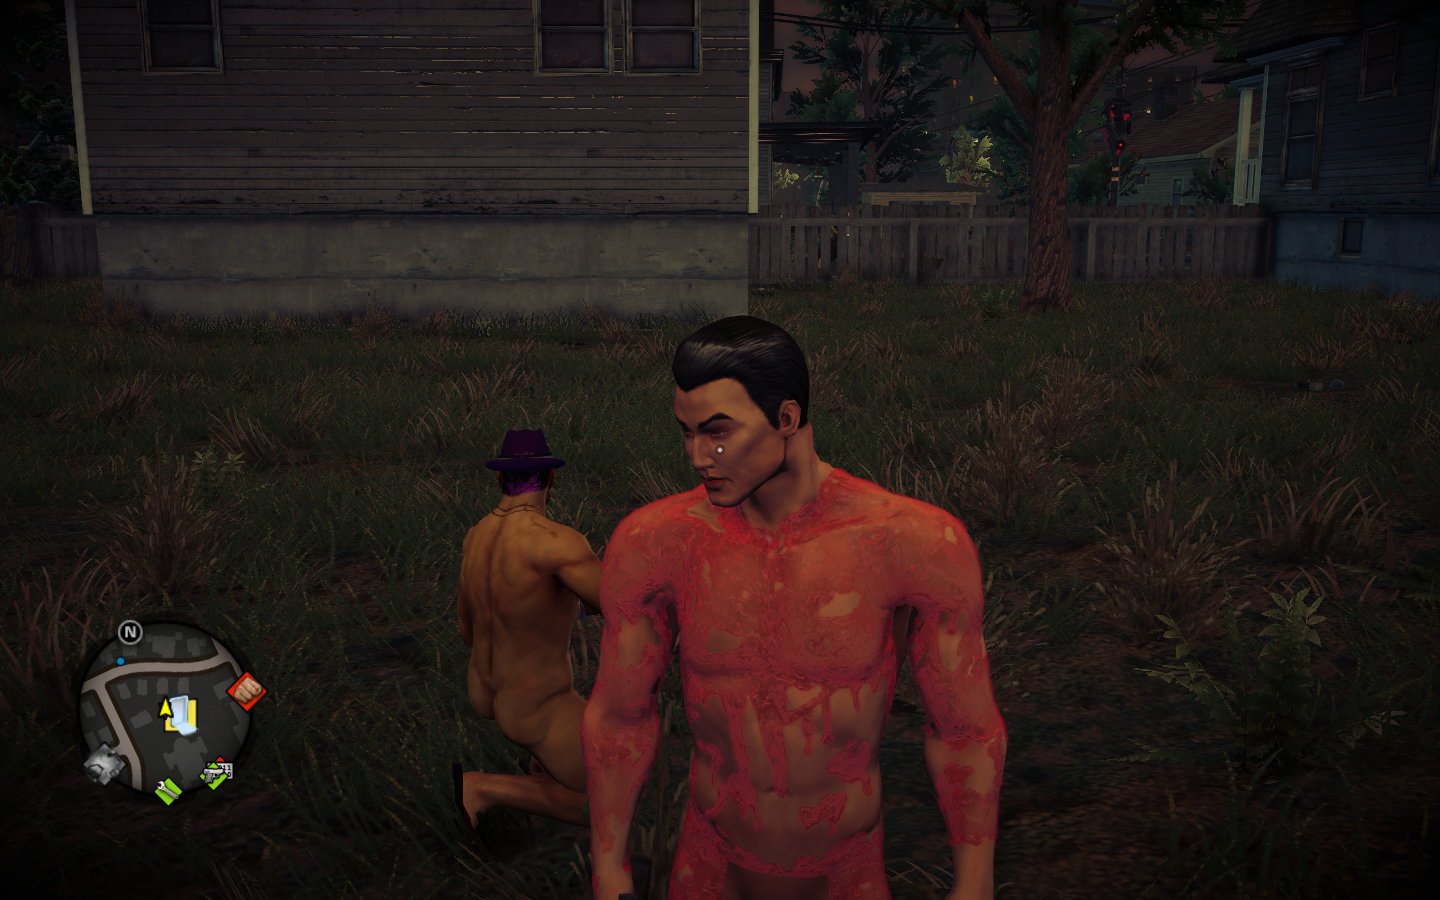 chad diggler recommends saints row nudity mod pic